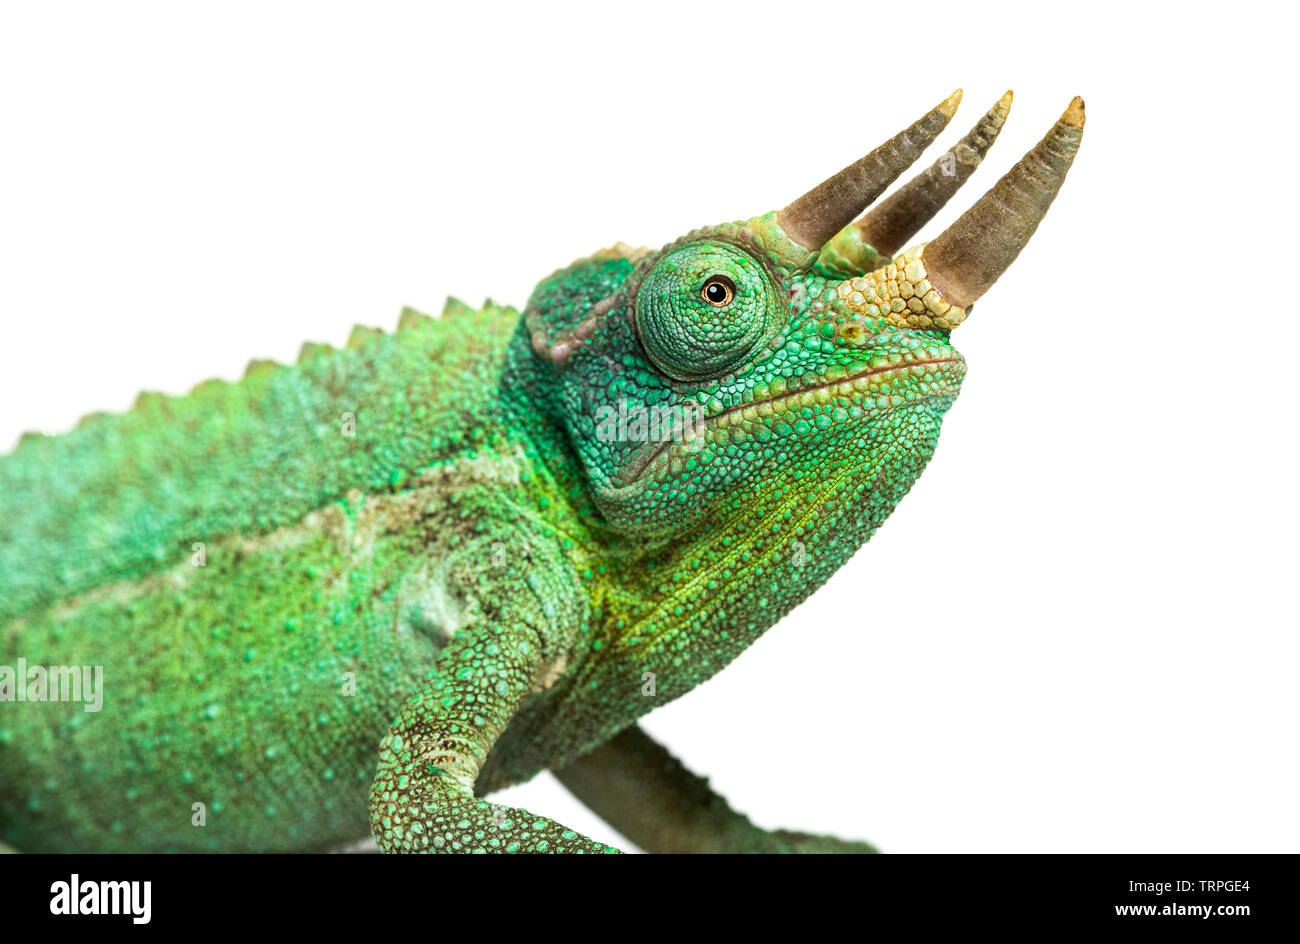 Close-up on a head of a Jackson's horned chameleon, Trioceros jacksonii, isolated on white against white background Stock Photo